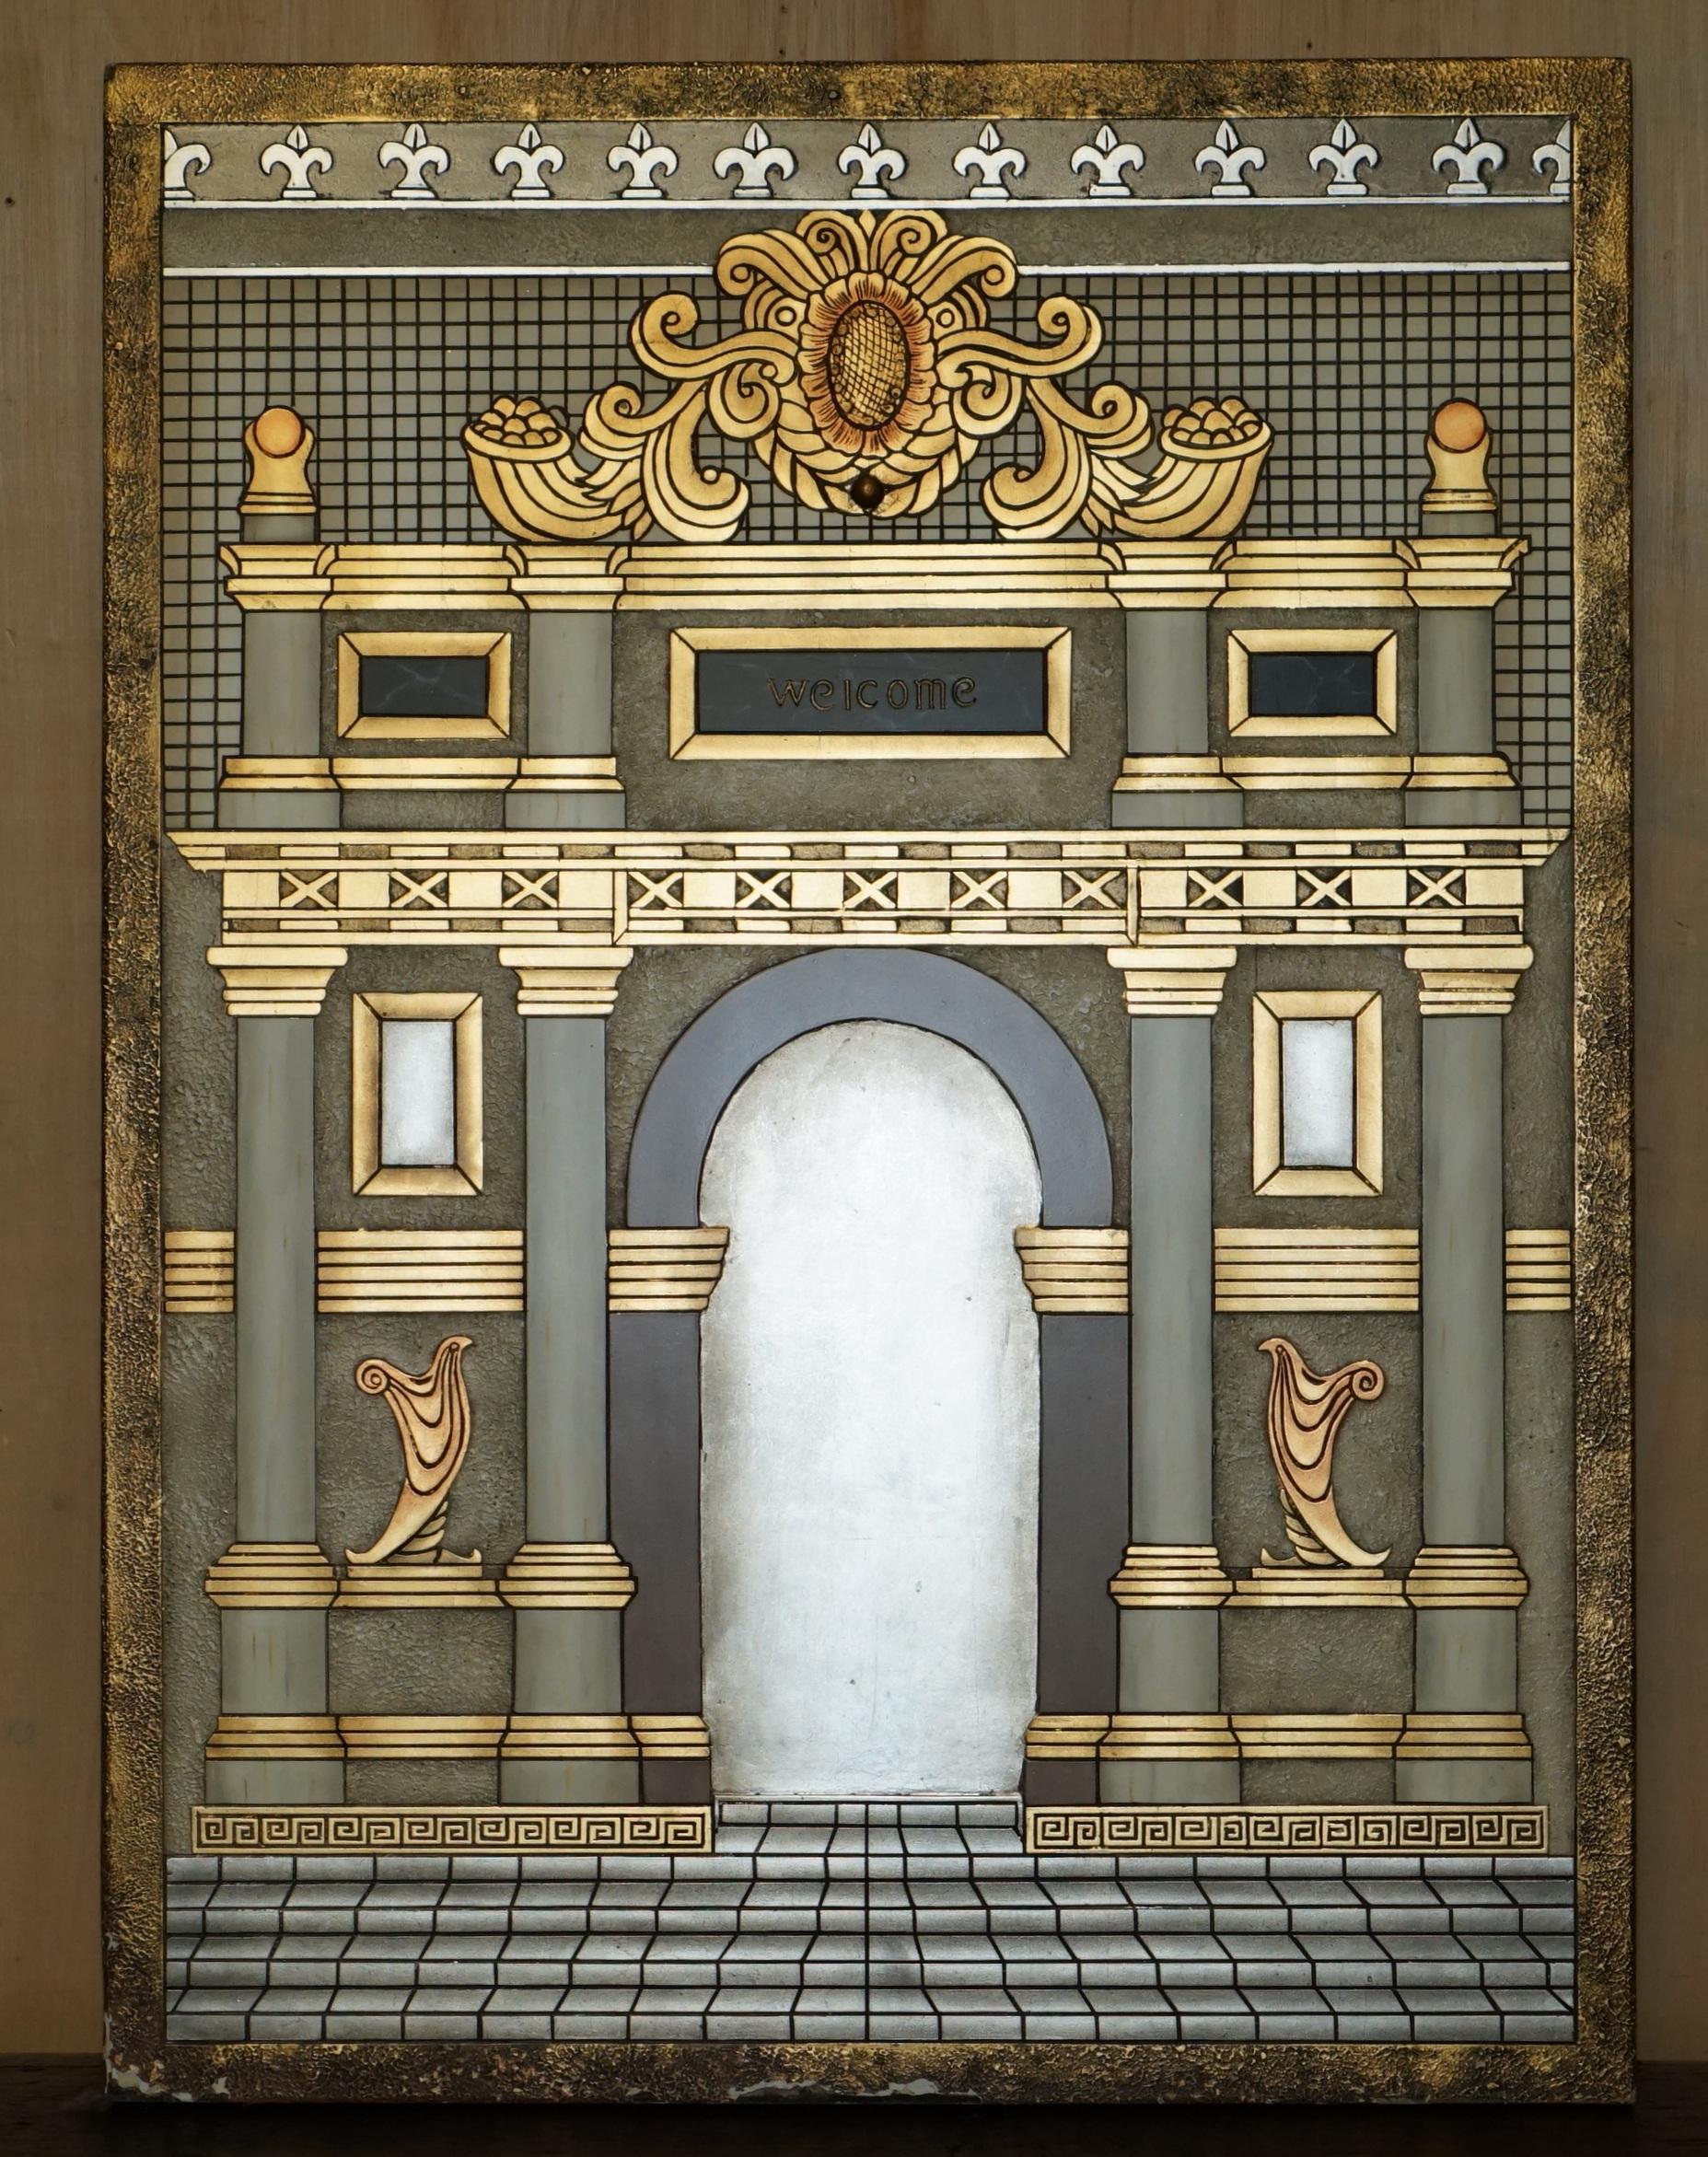 PAIR OF ViNTAGE DAVID LINLEY STYLE MASONIC LODGE PERSPECTIVE 3D WALL PICTURES 2